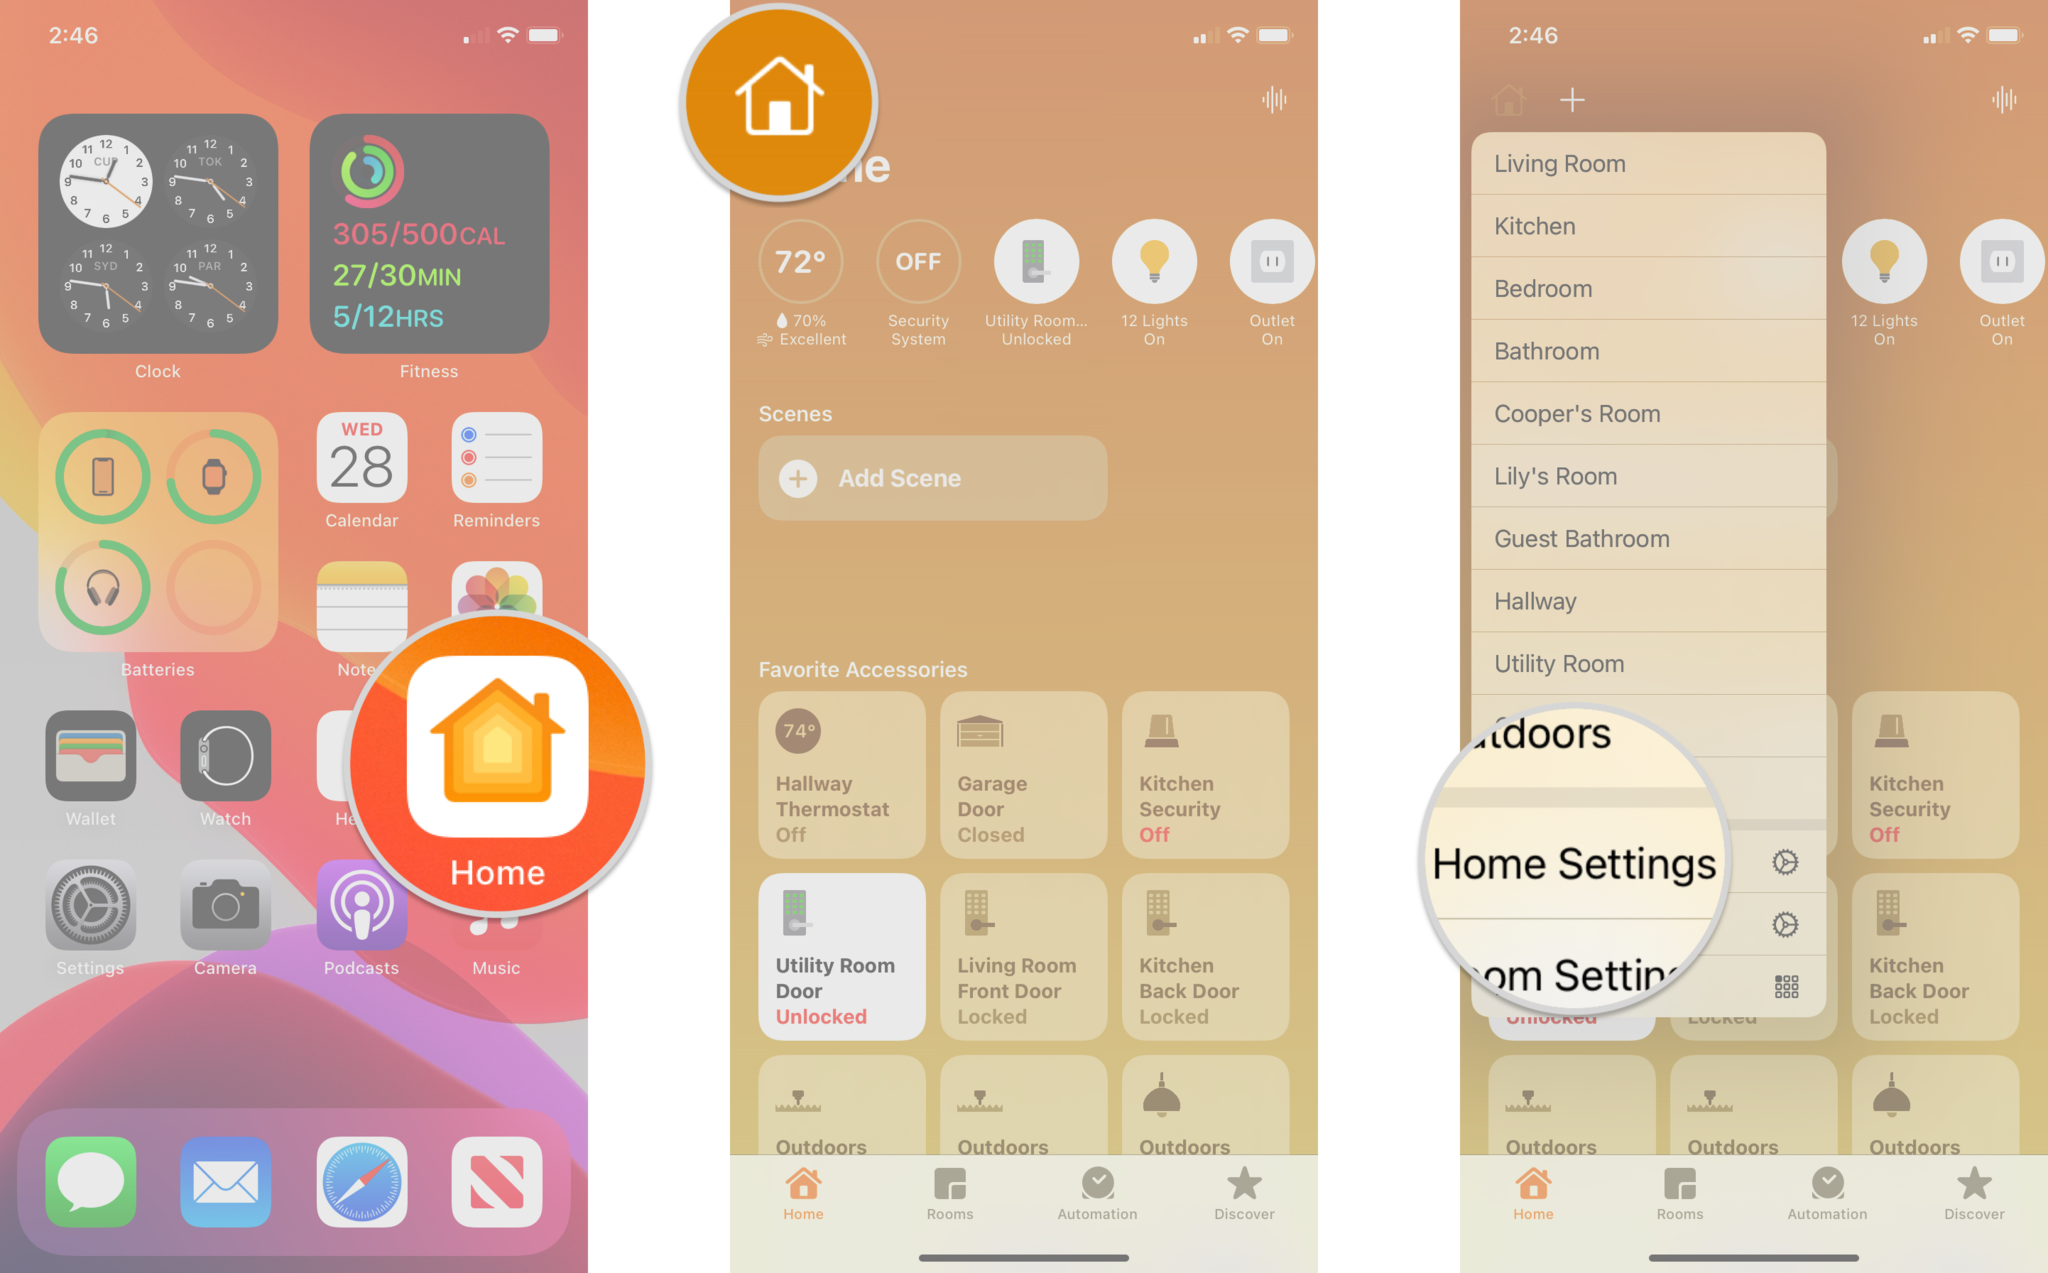 How to enable HomeKit Accessory Security in the Home app by showing steps on an iPhone: Launch the Home app, Tap on the Home icon, Tap Home Settings